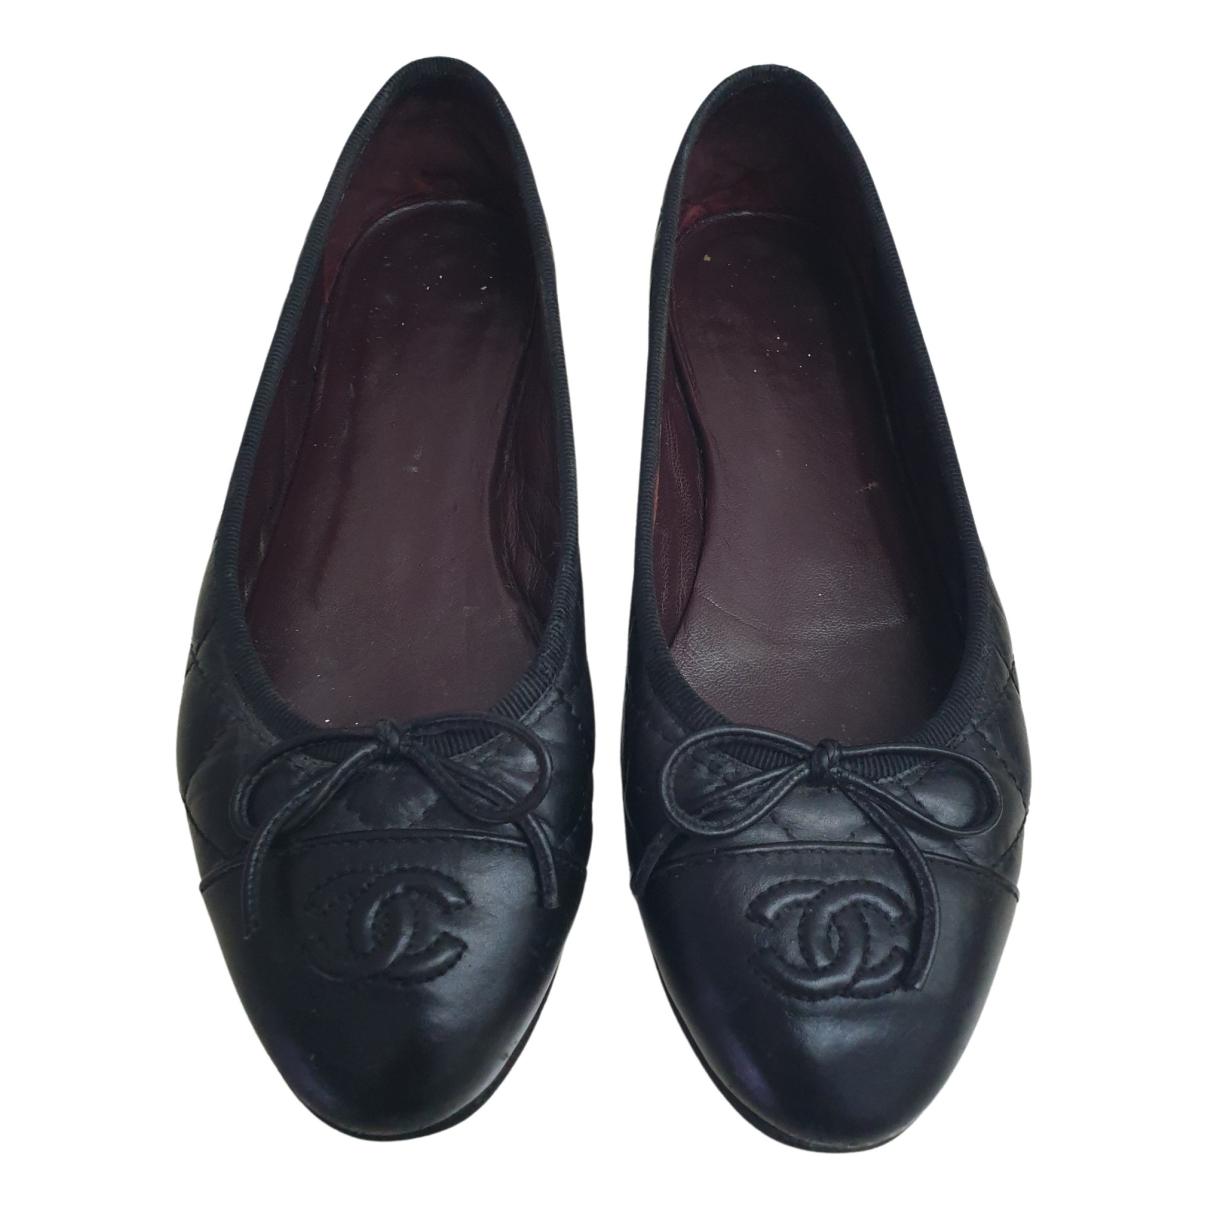 Patent leather ballet flats Chanel Black size 36.5 EU in Patent